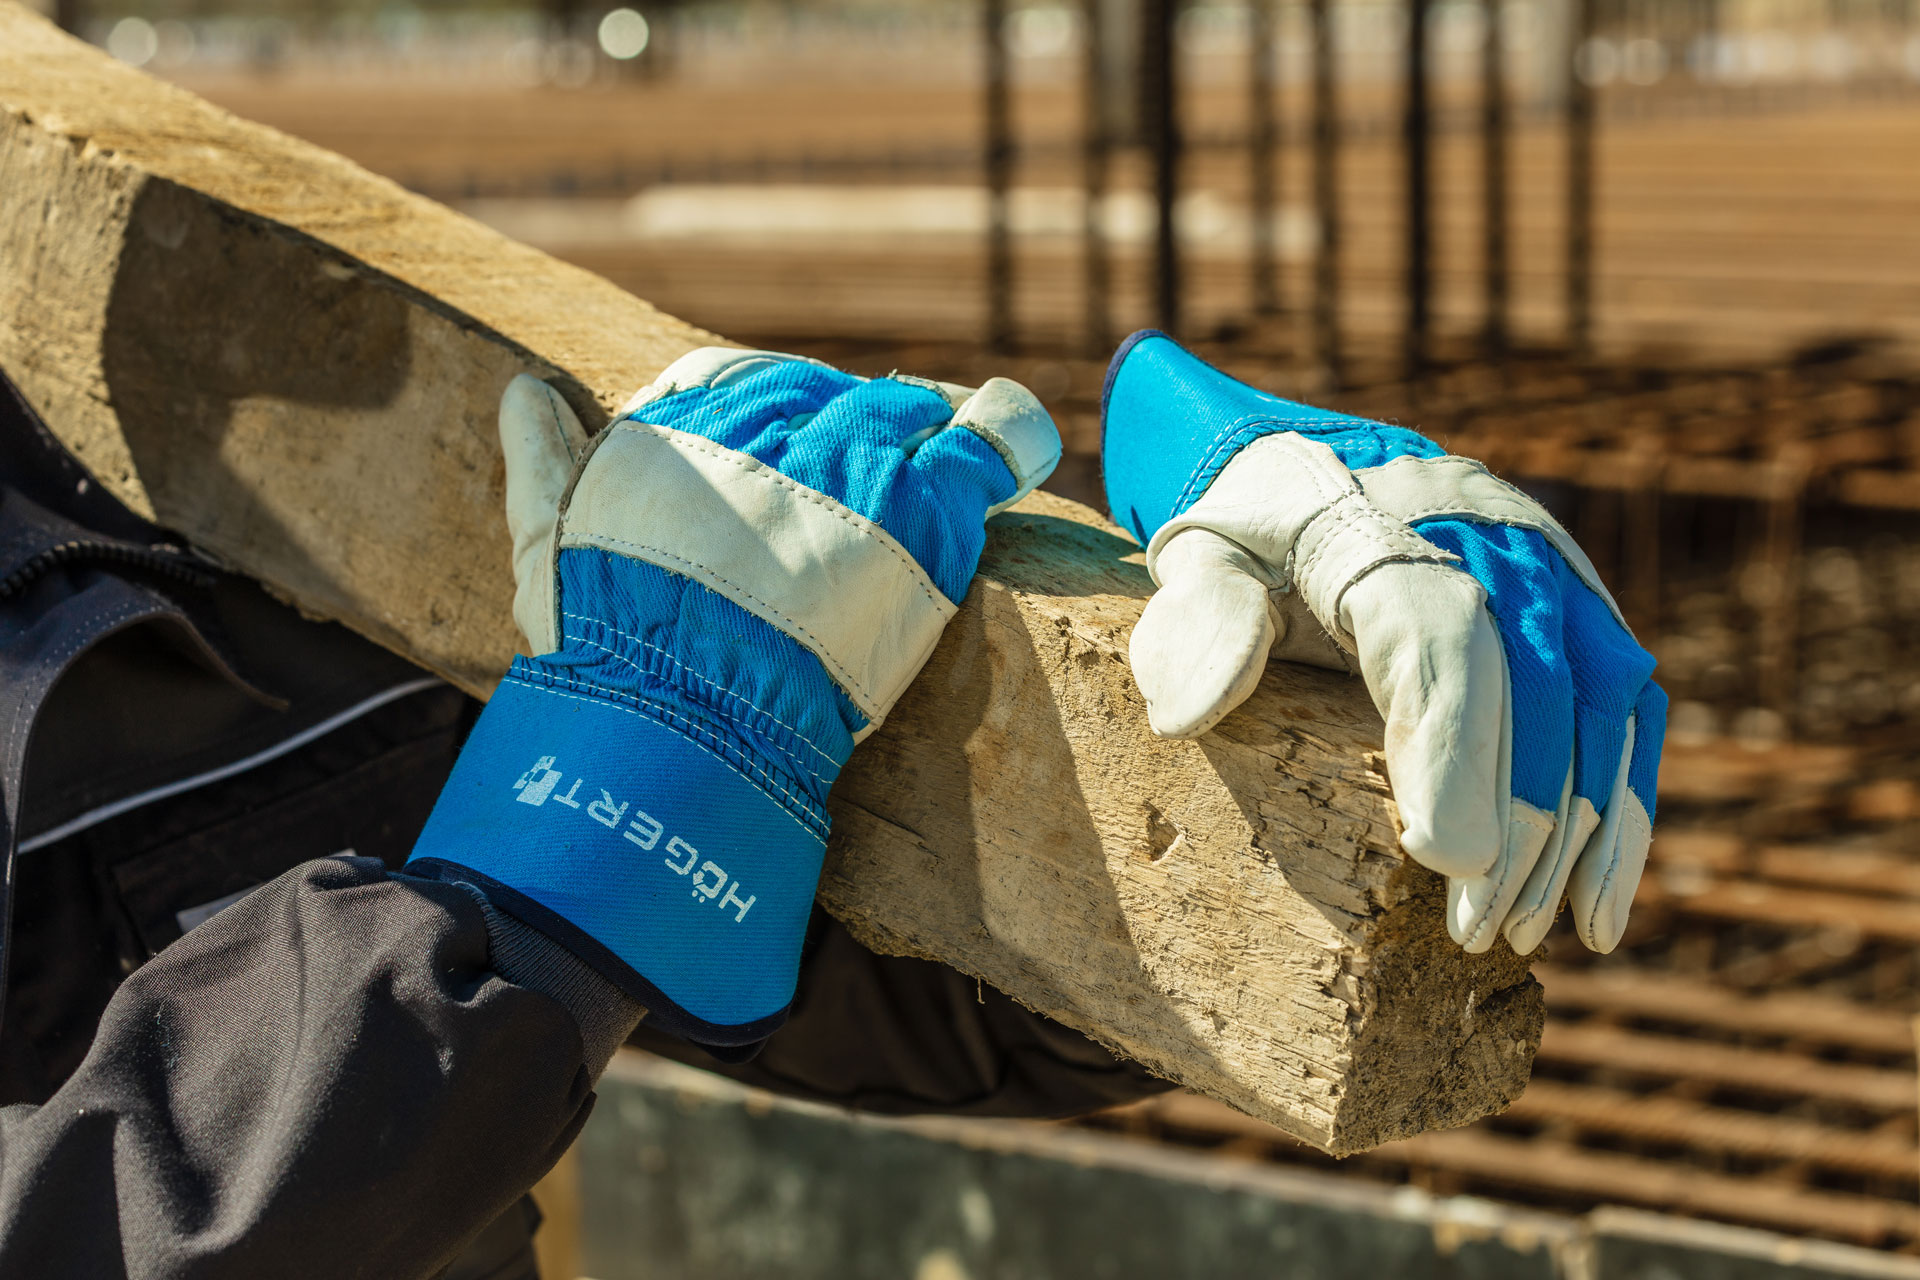 What general requirements must protective gloves meet?